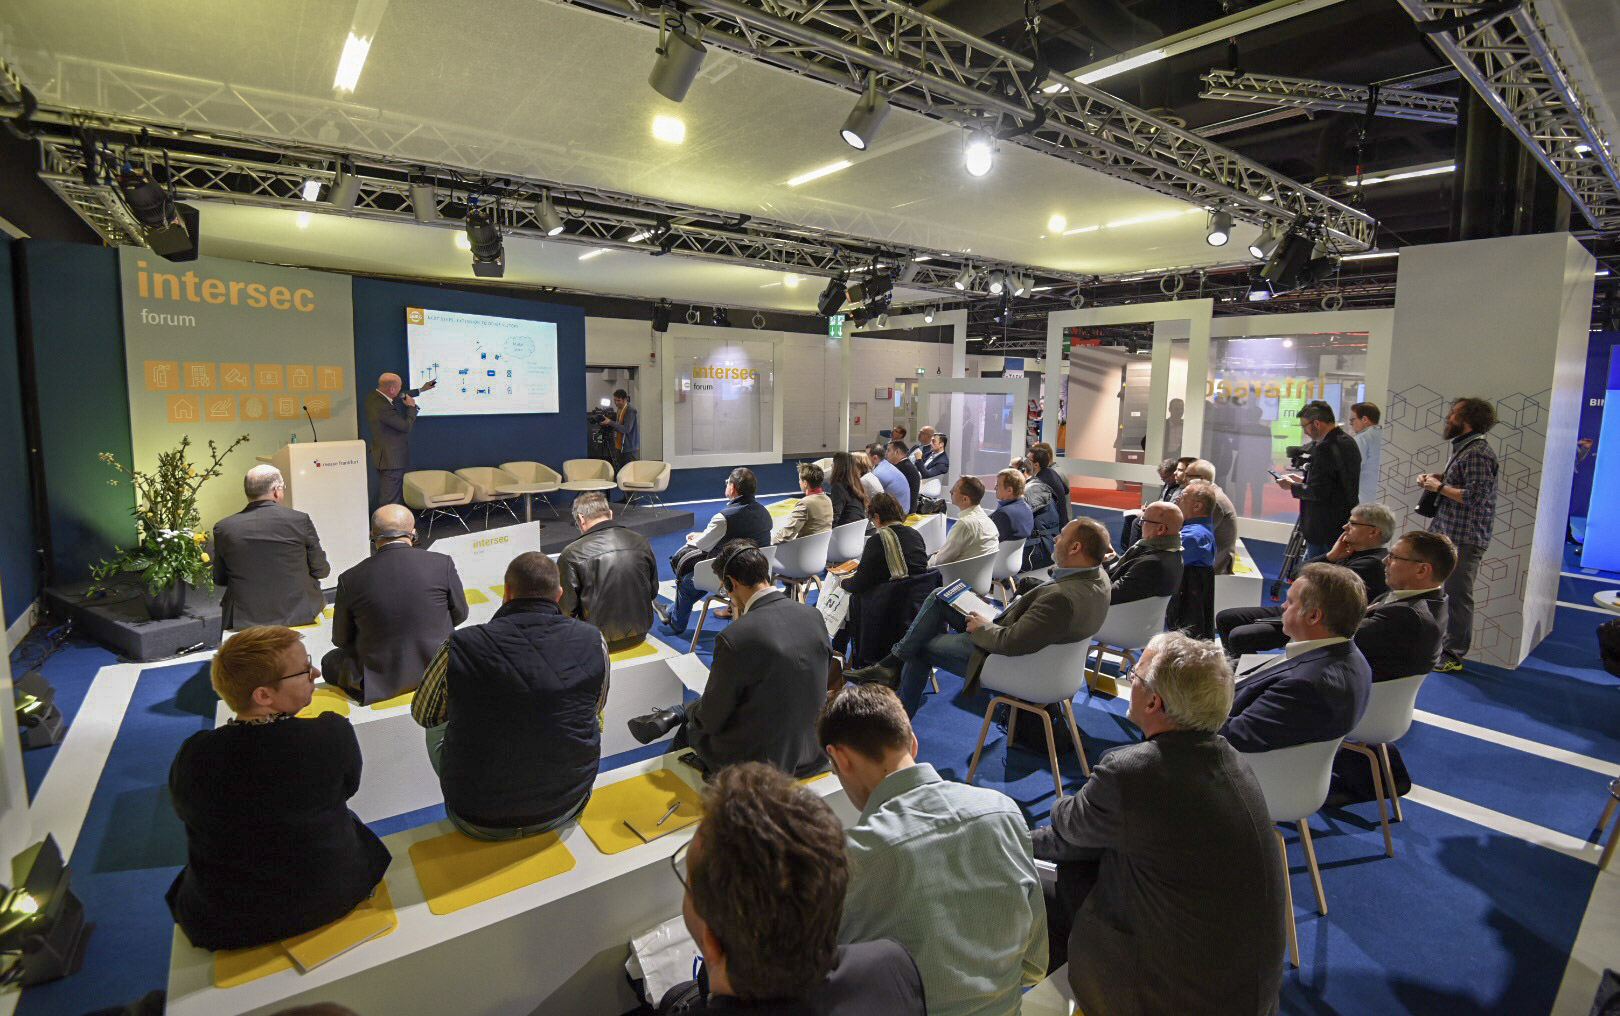 4th Intersec Forum: shares know-how on connected security technology in the field of  building-services technology (Source: Messe Frankfurt / Sandra Gätke)